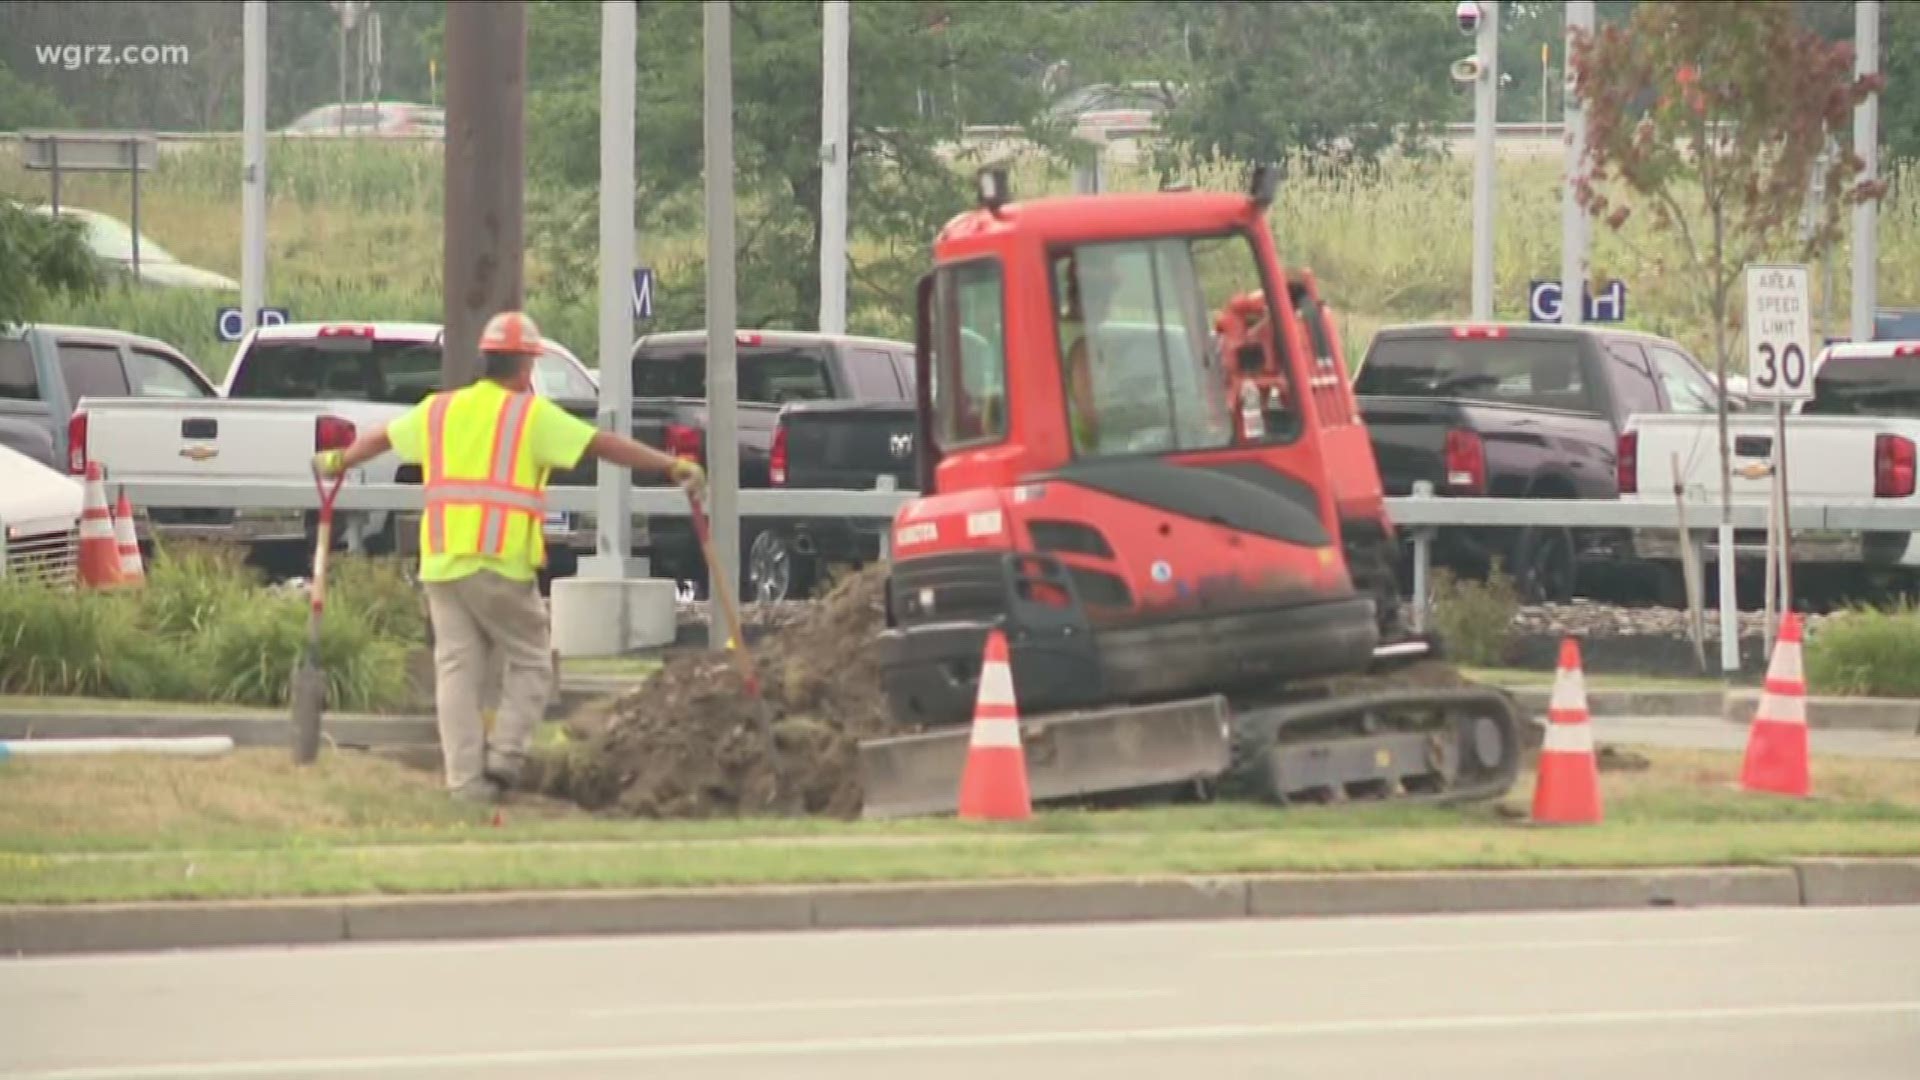 Town of Amherst engineers say gas lines need to be marked before contractors can begin lighting project construction on Niagara Falls Boulevard north of I-290 to Tonawanda Creek Road.